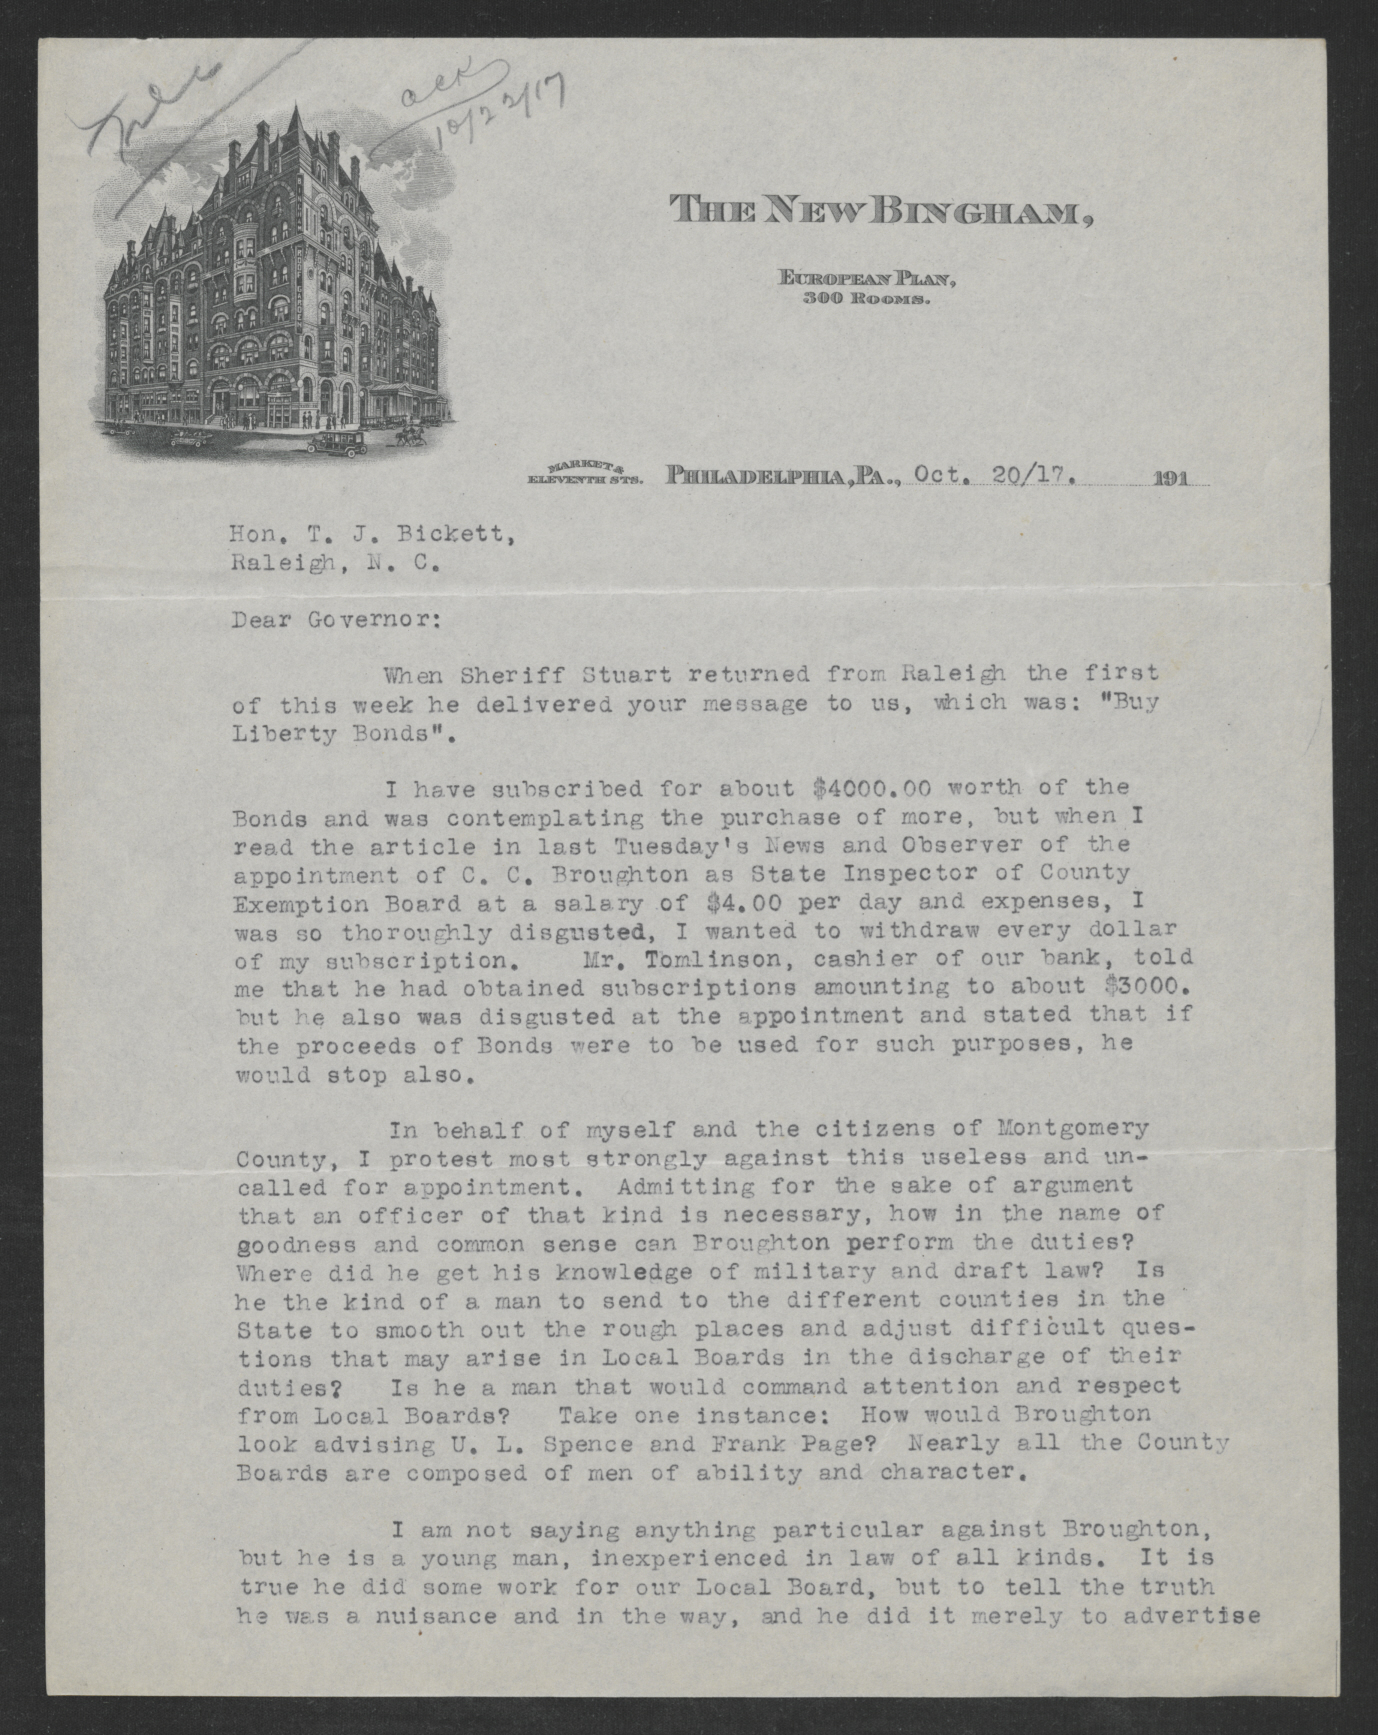 Letter from Charles A. Armstrong to Thomas W. Bickett, October 20, 1917, page 1